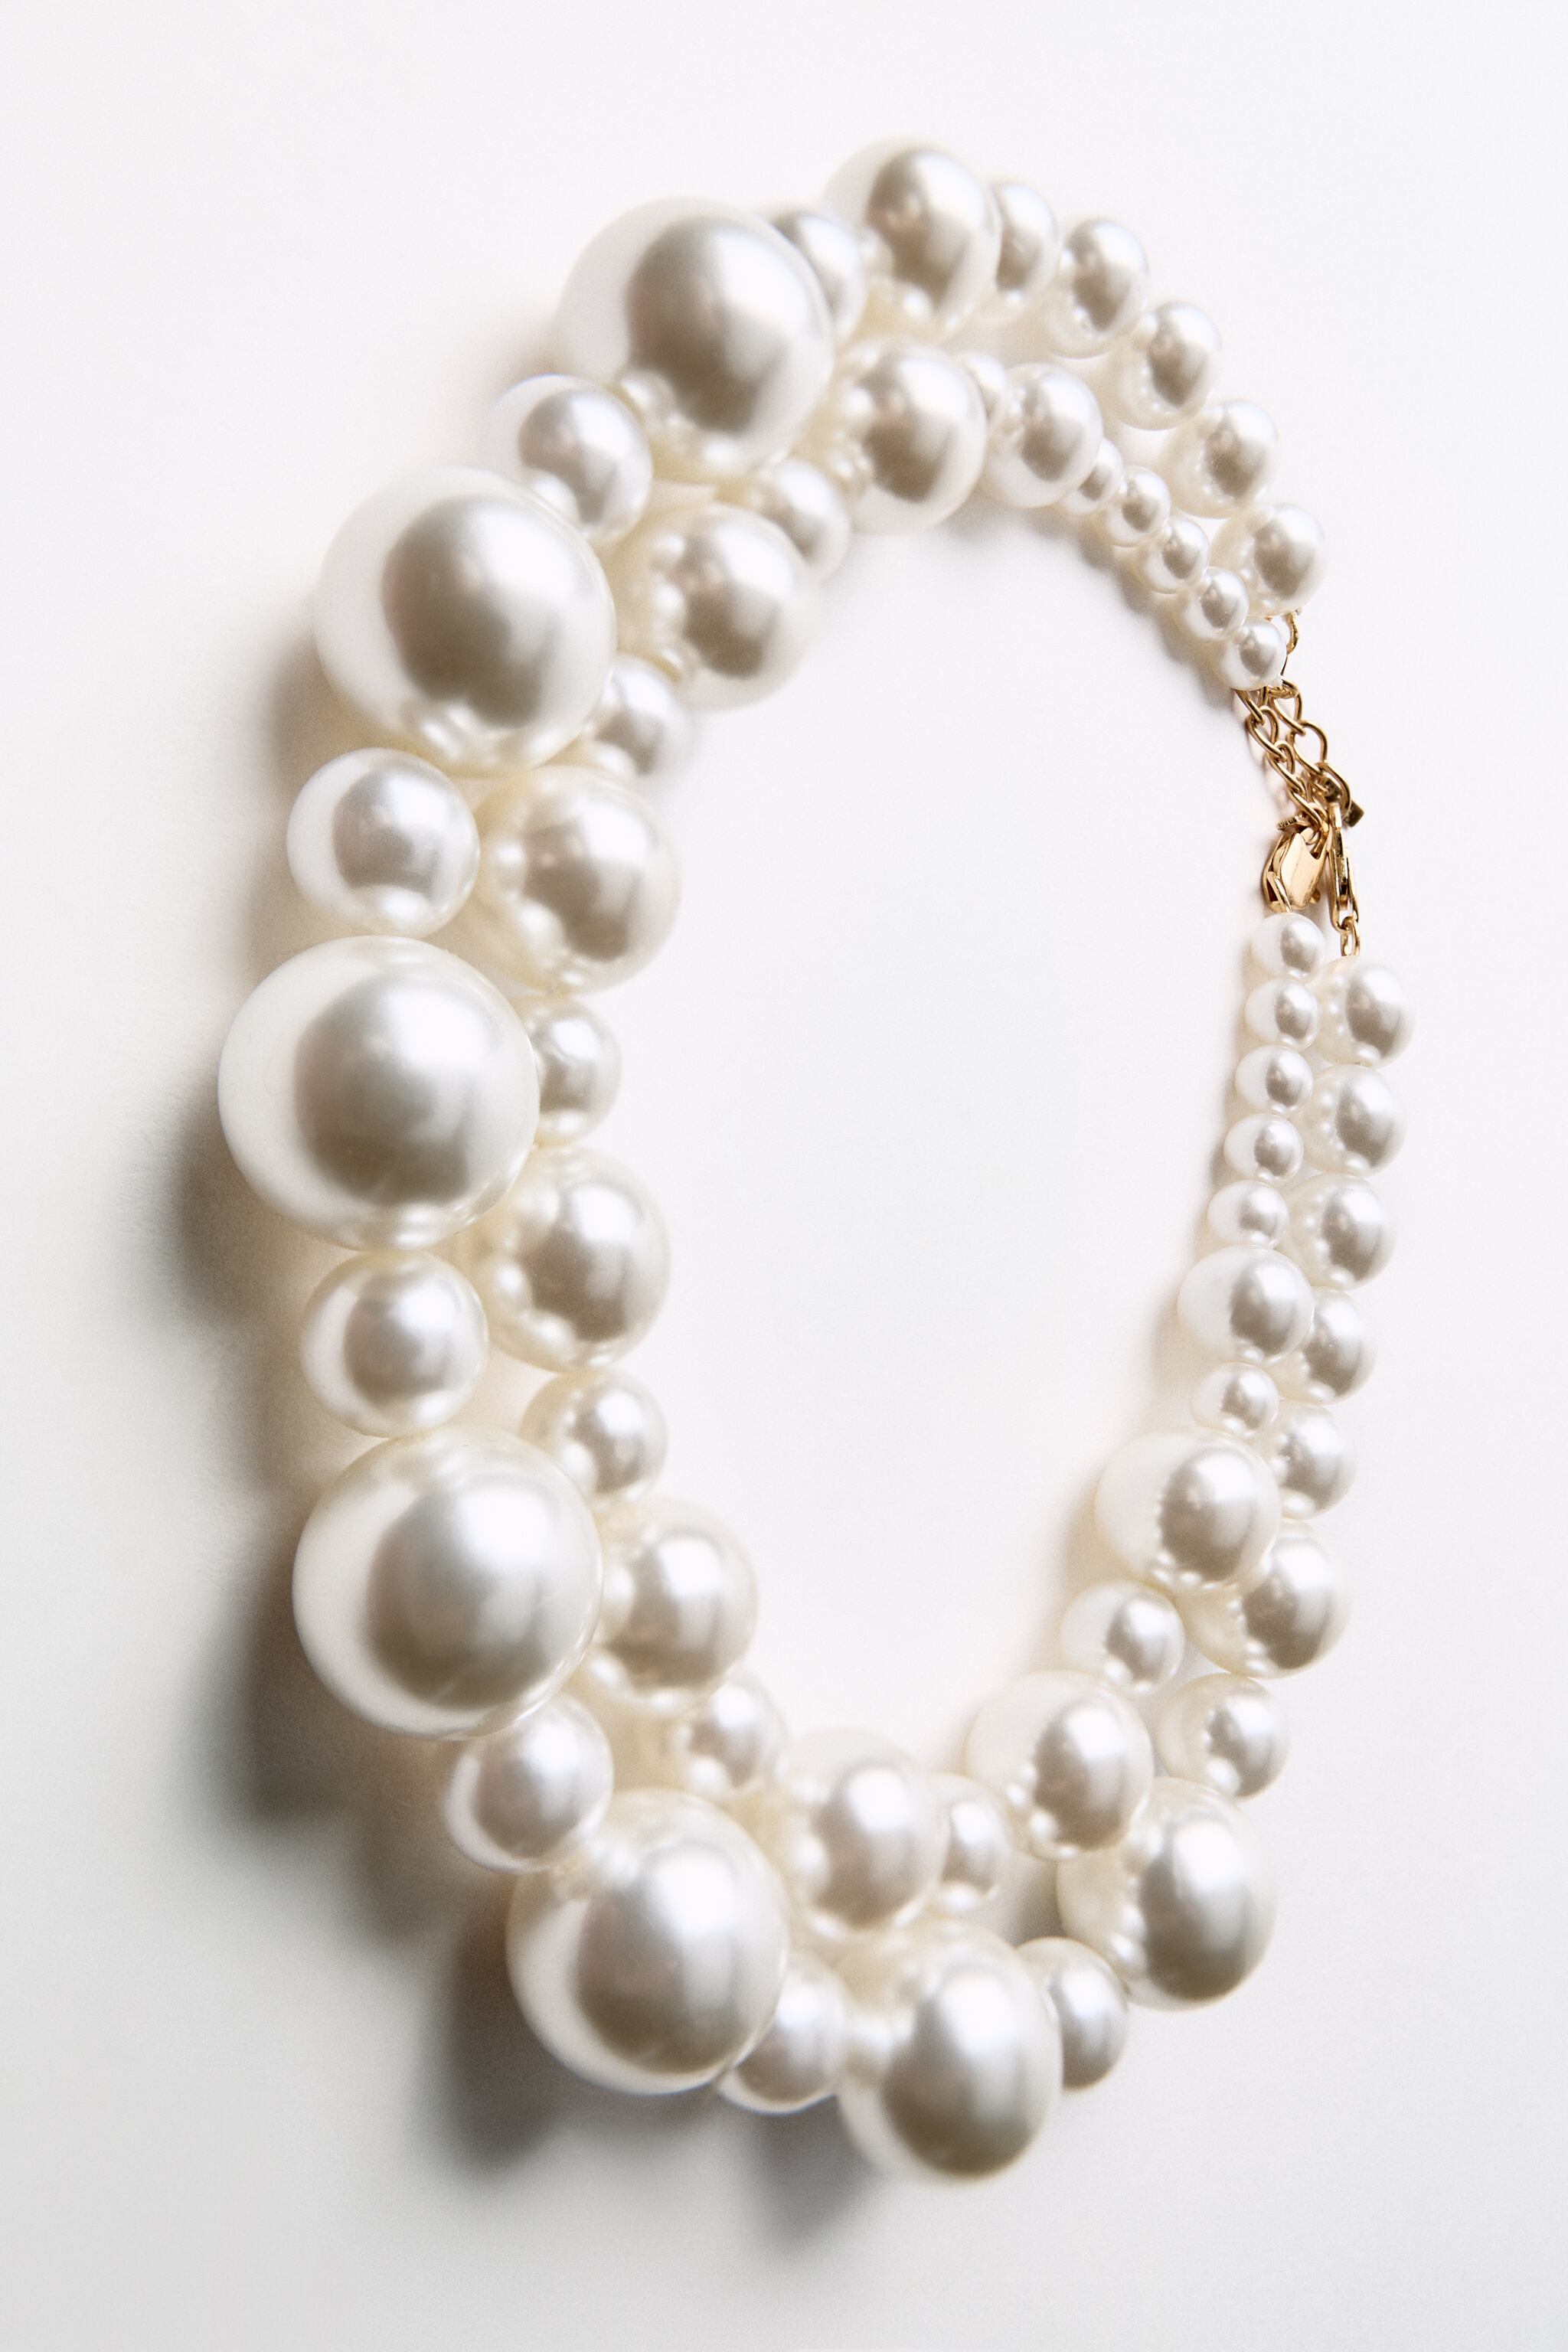 PACK OF PEARL NECKLACES